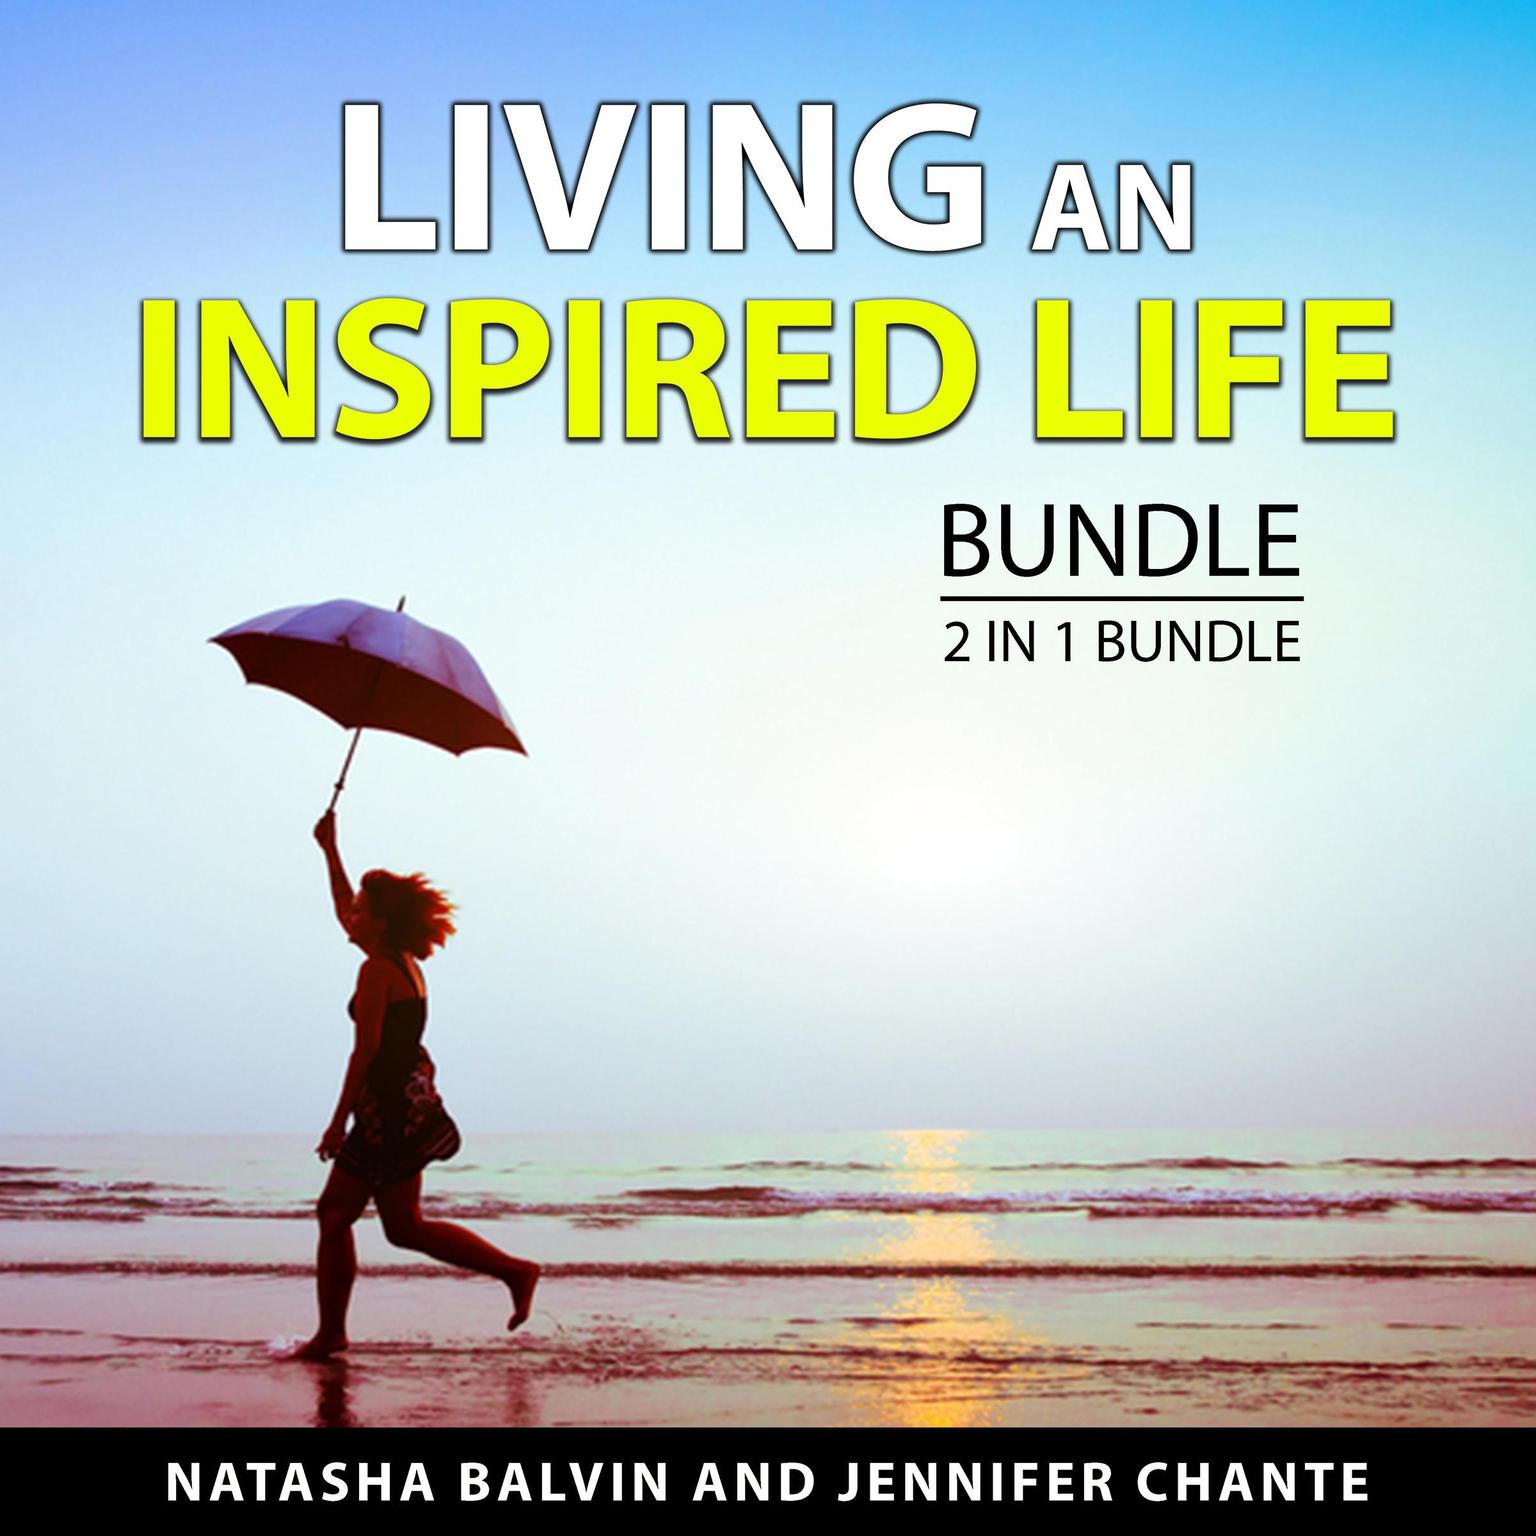 Living an Inspired Life Bundle, 2 in 1 Bundle: The Obstacle and Inspiration for a Beautiful Life Audiobook, by Jennifer Chante